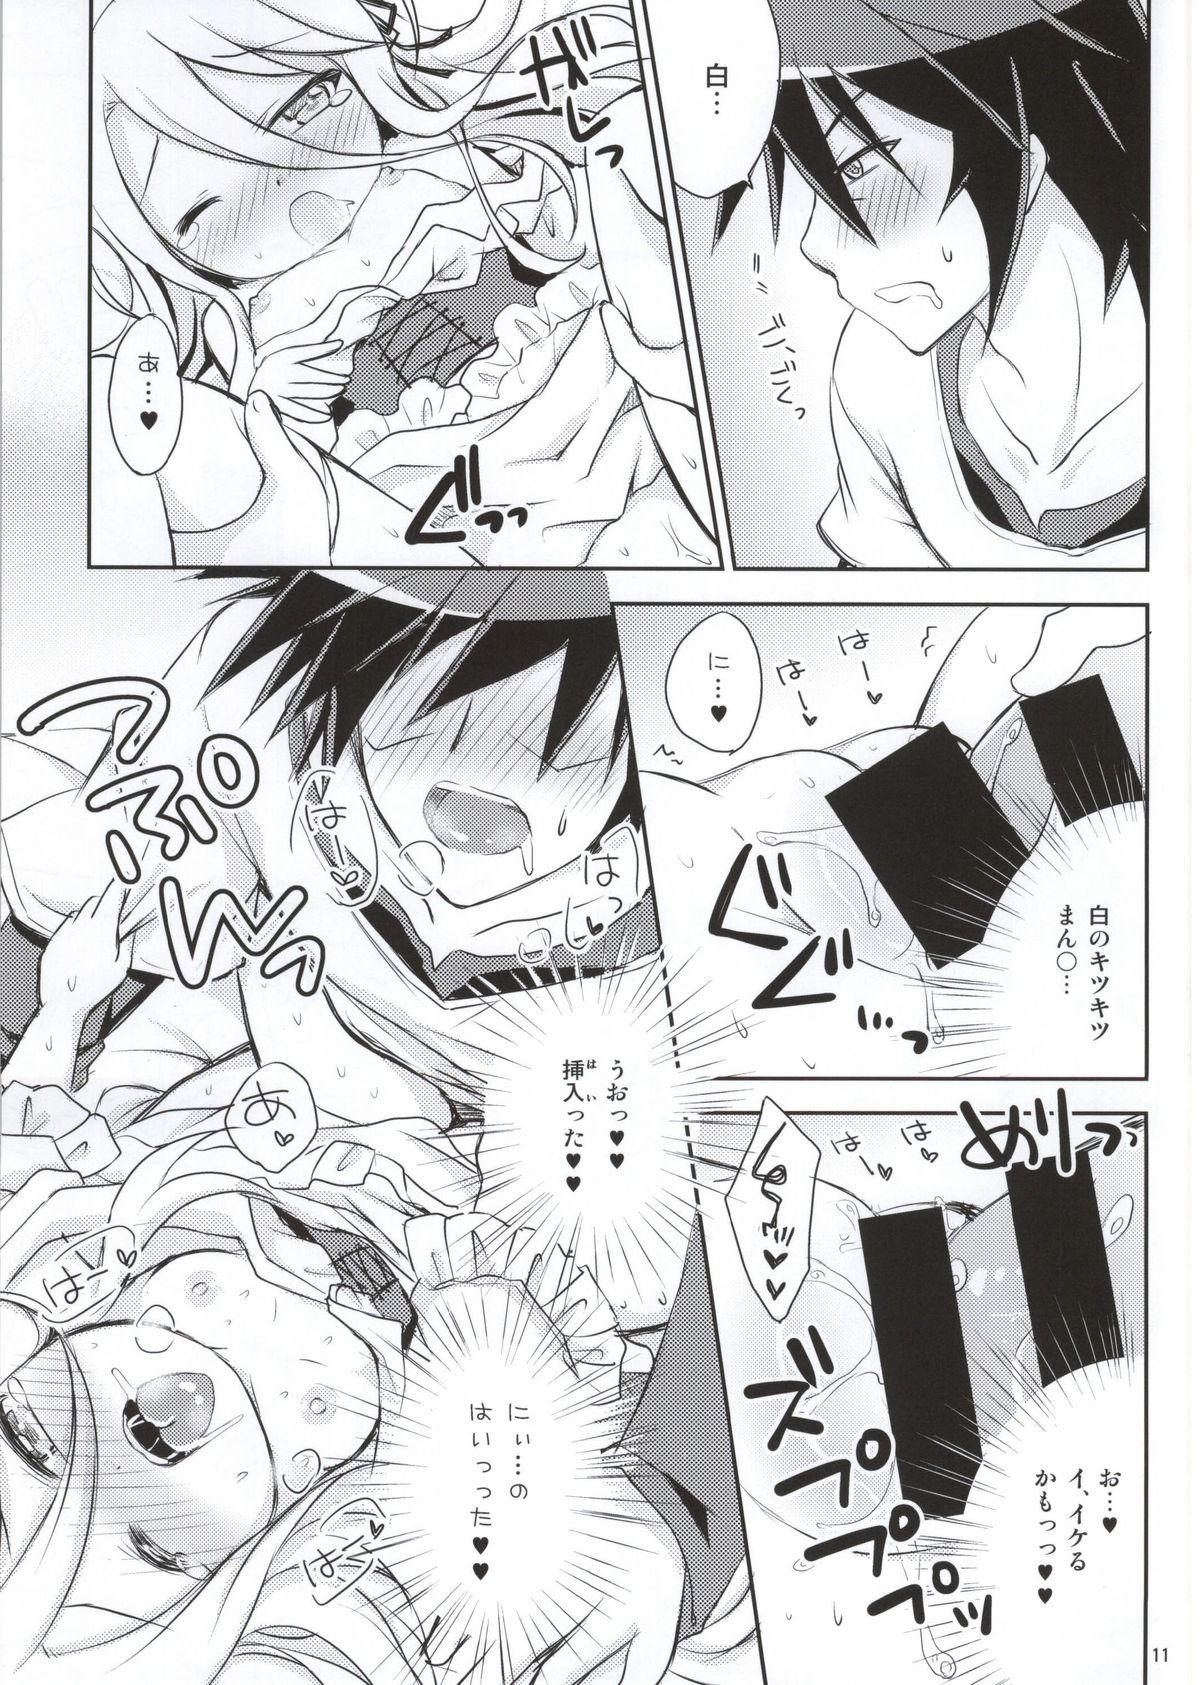 Glam Nii, Osotte? - No game no life Load - Page 8